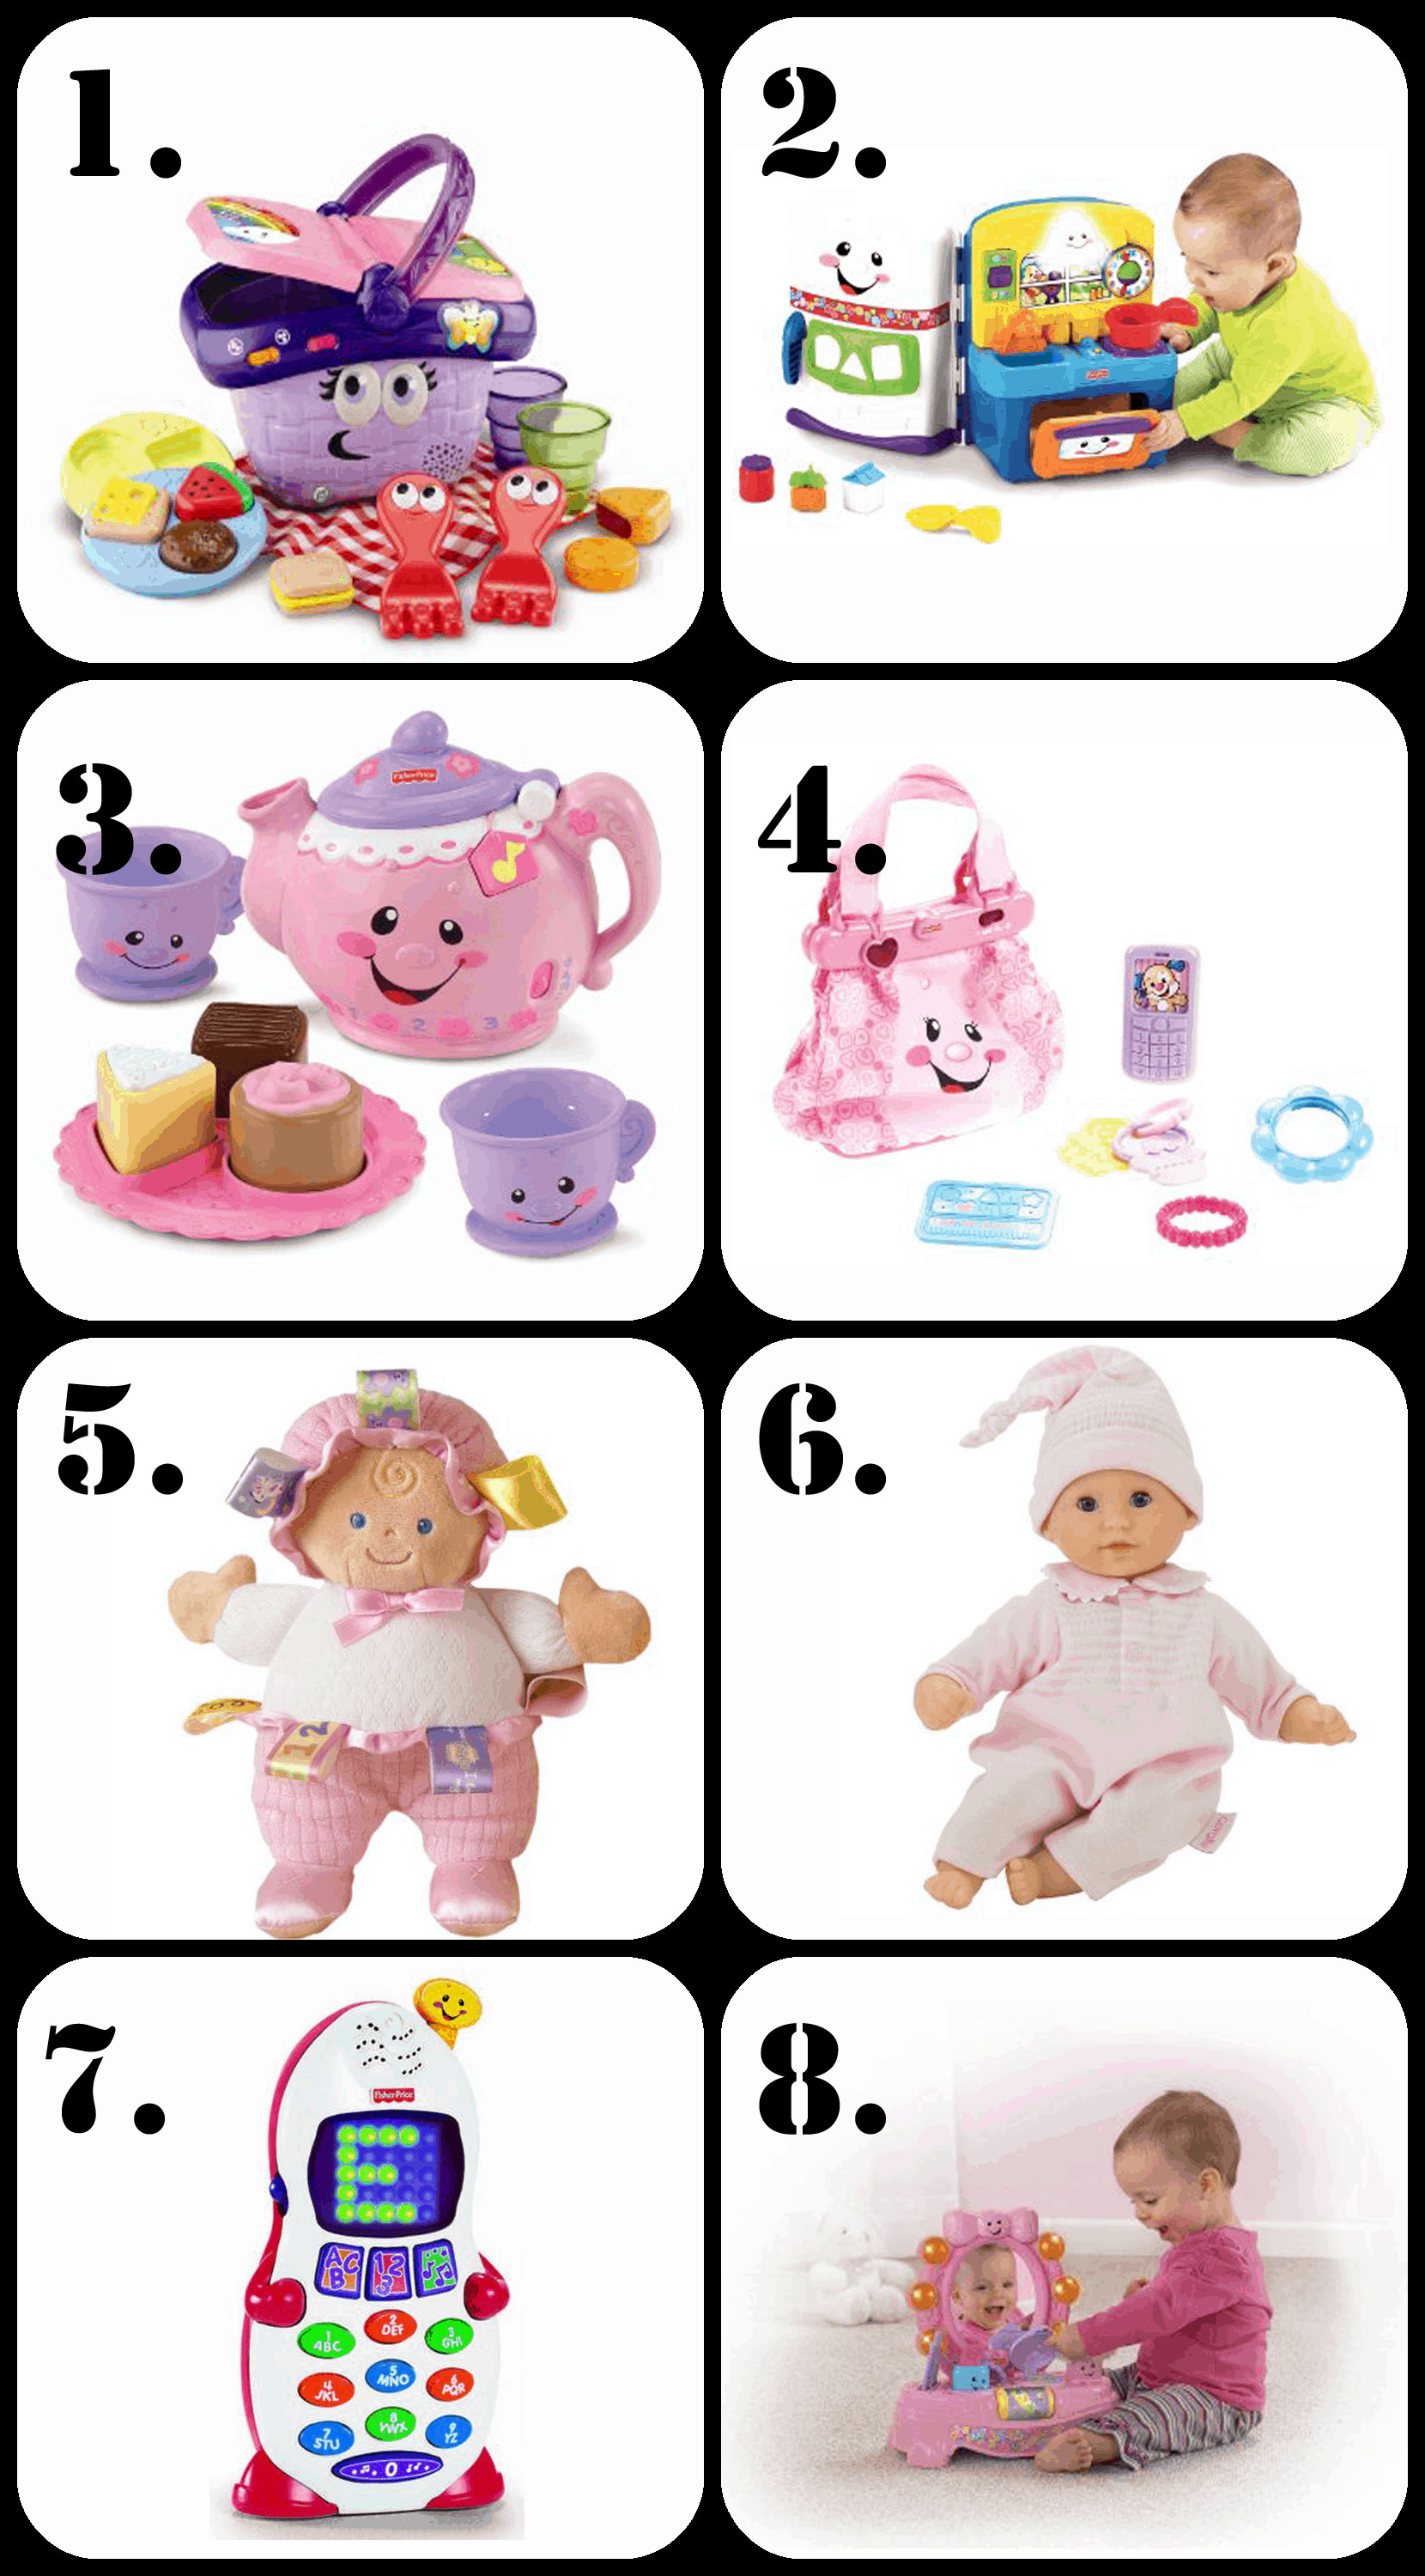 Top Gift Ideas For Girls
 The Ultimate List of Gift Ideas for a 1 Year Old Girl